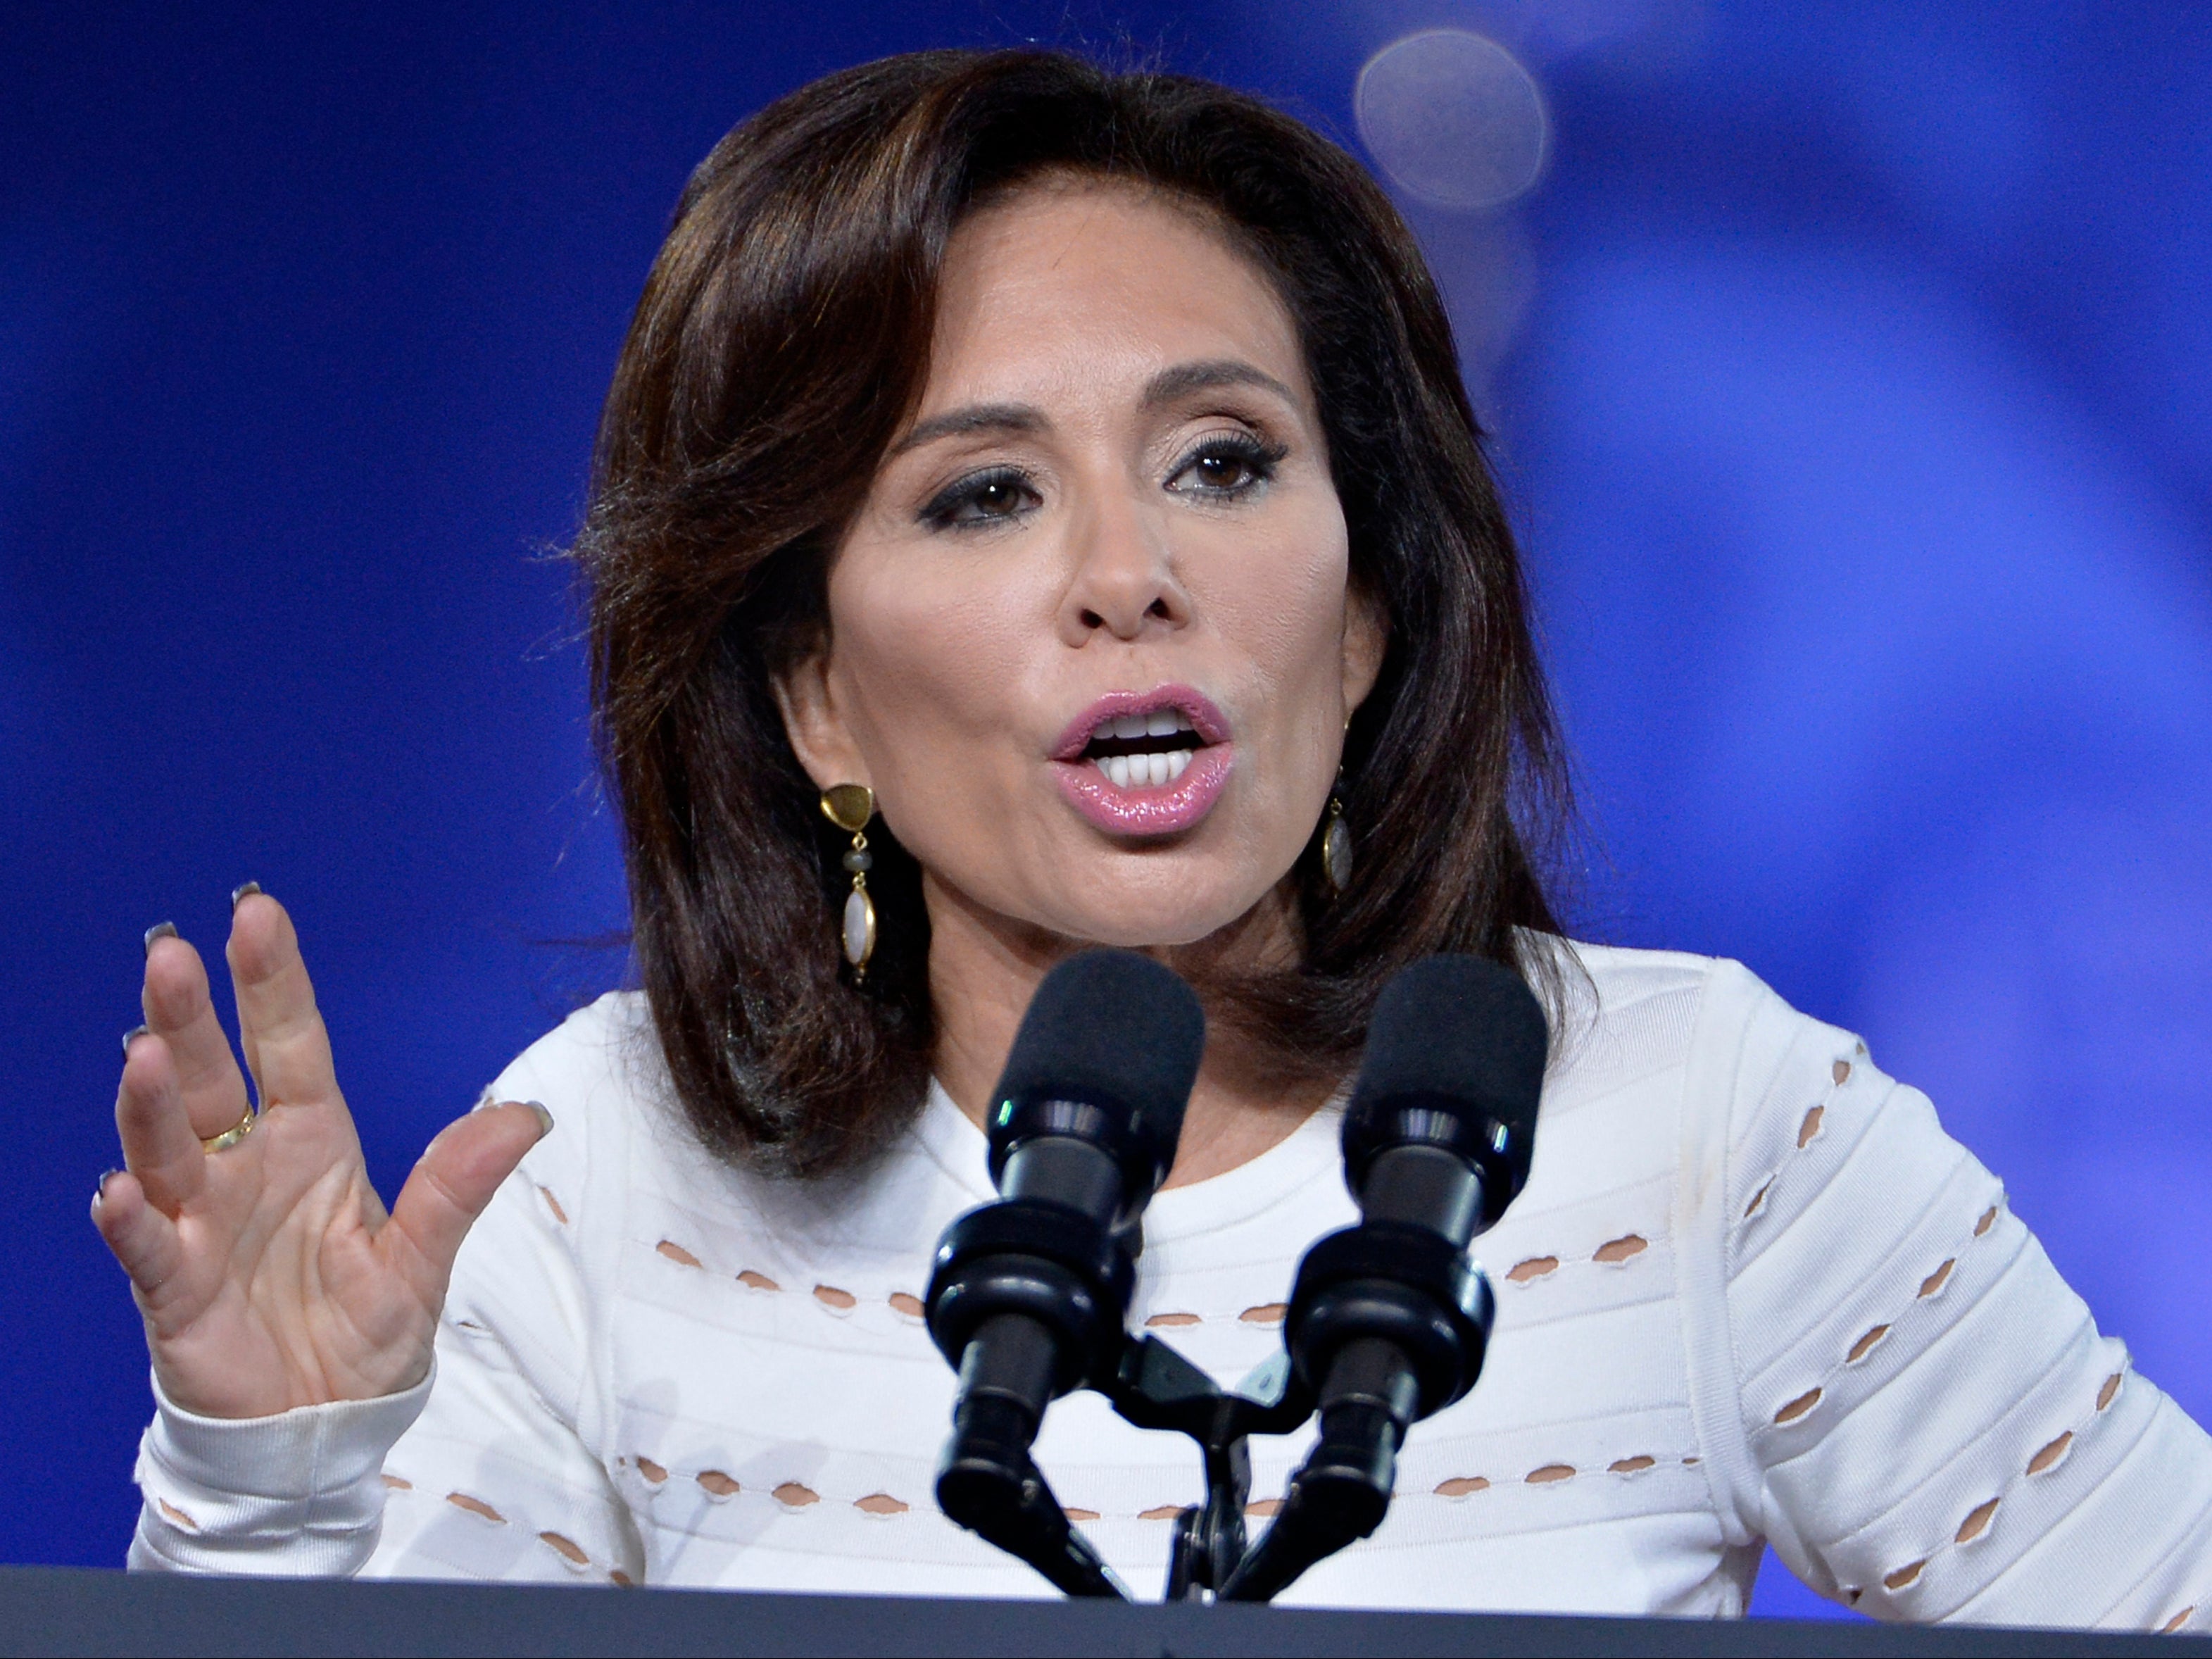 Judge Jeanine Pirro has been named as a new host of The Five